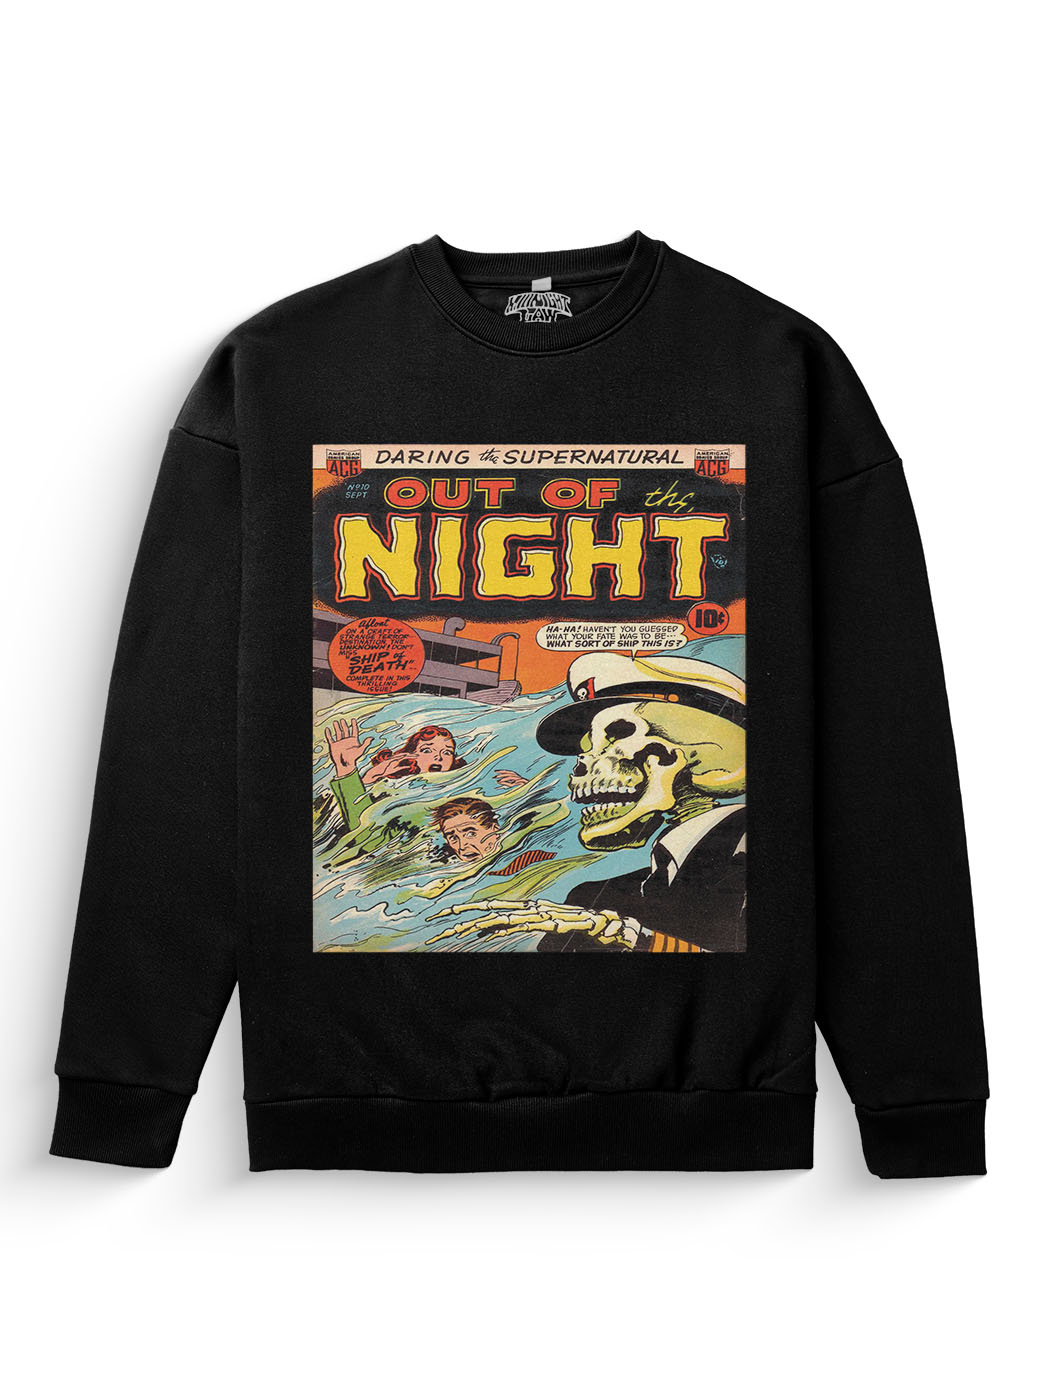 Out of the Night Sweatshirt